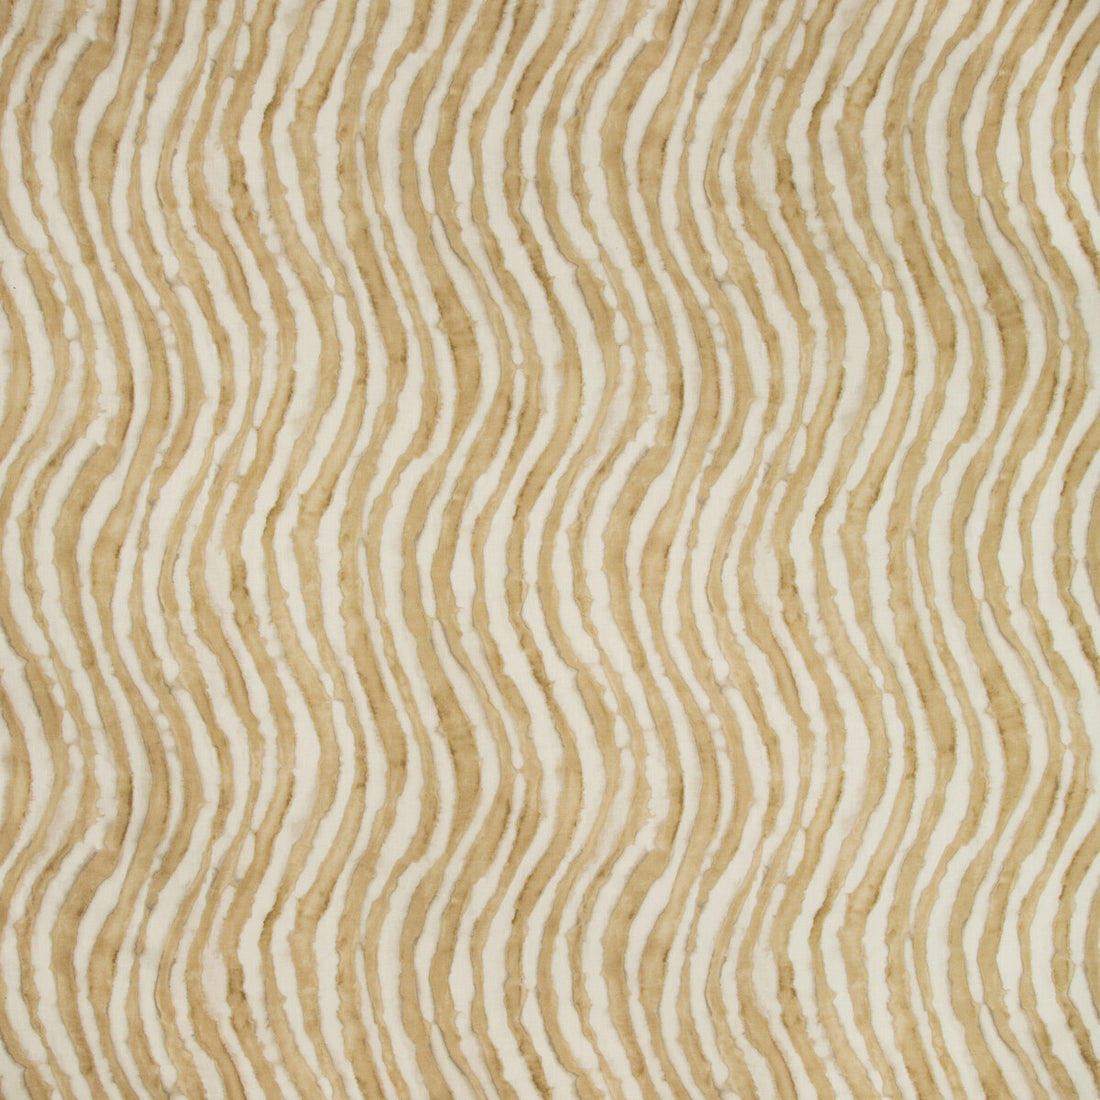 Makai fabric in ochre color - pattern MAKAI.16.0 - by Kravet Couture in the Terrae Prints collection